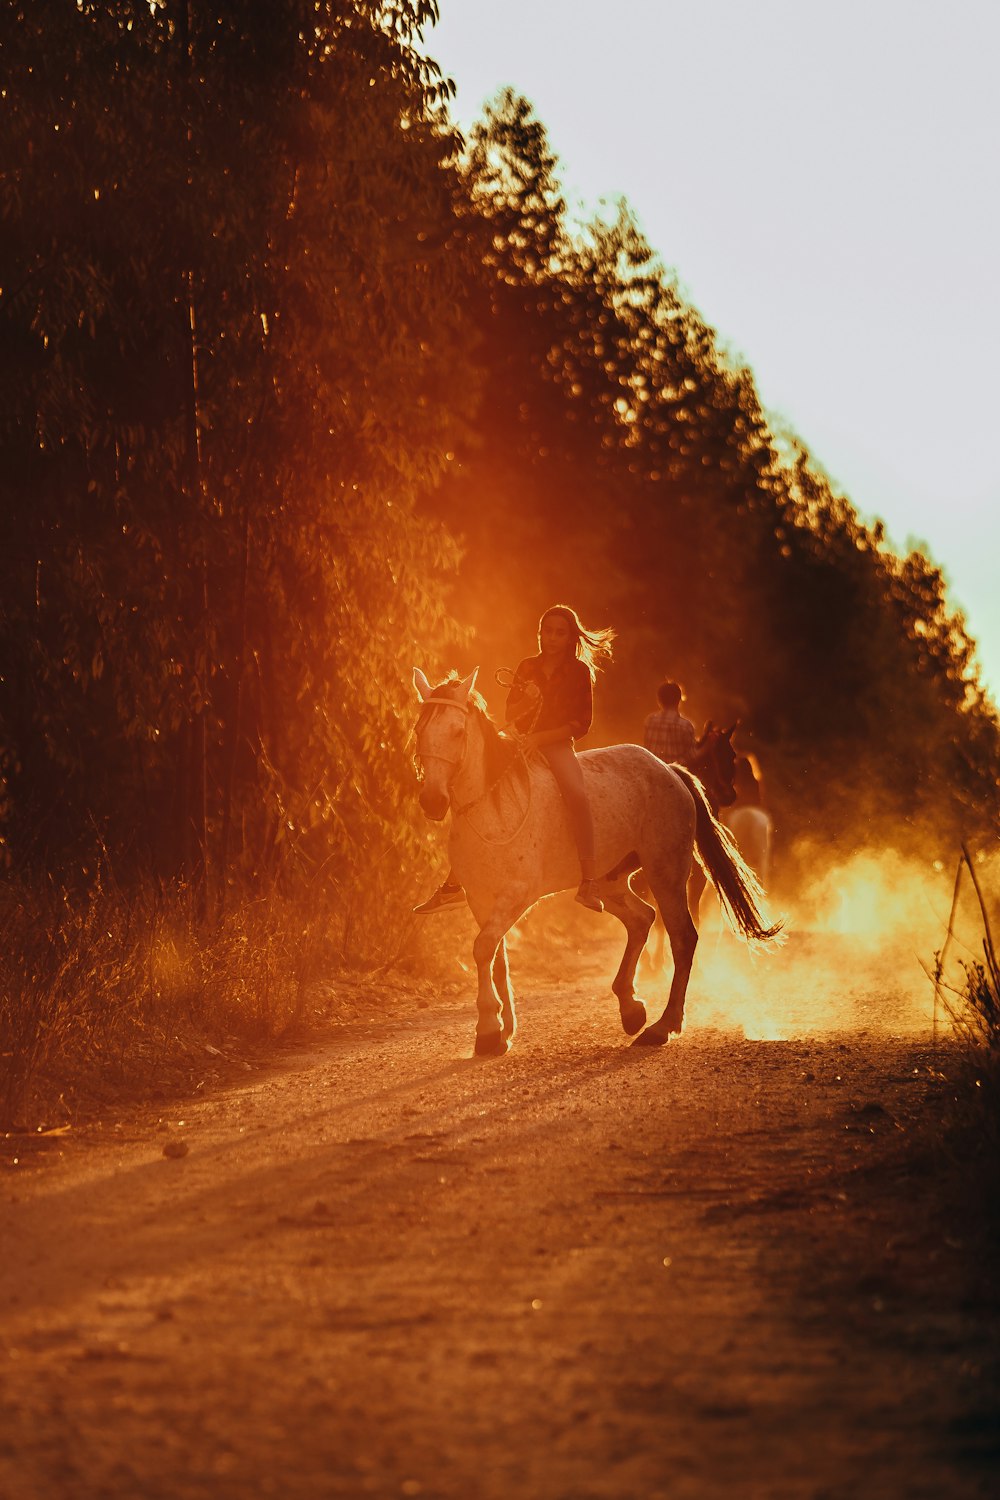 2 men riding horse on dirt road during daytime